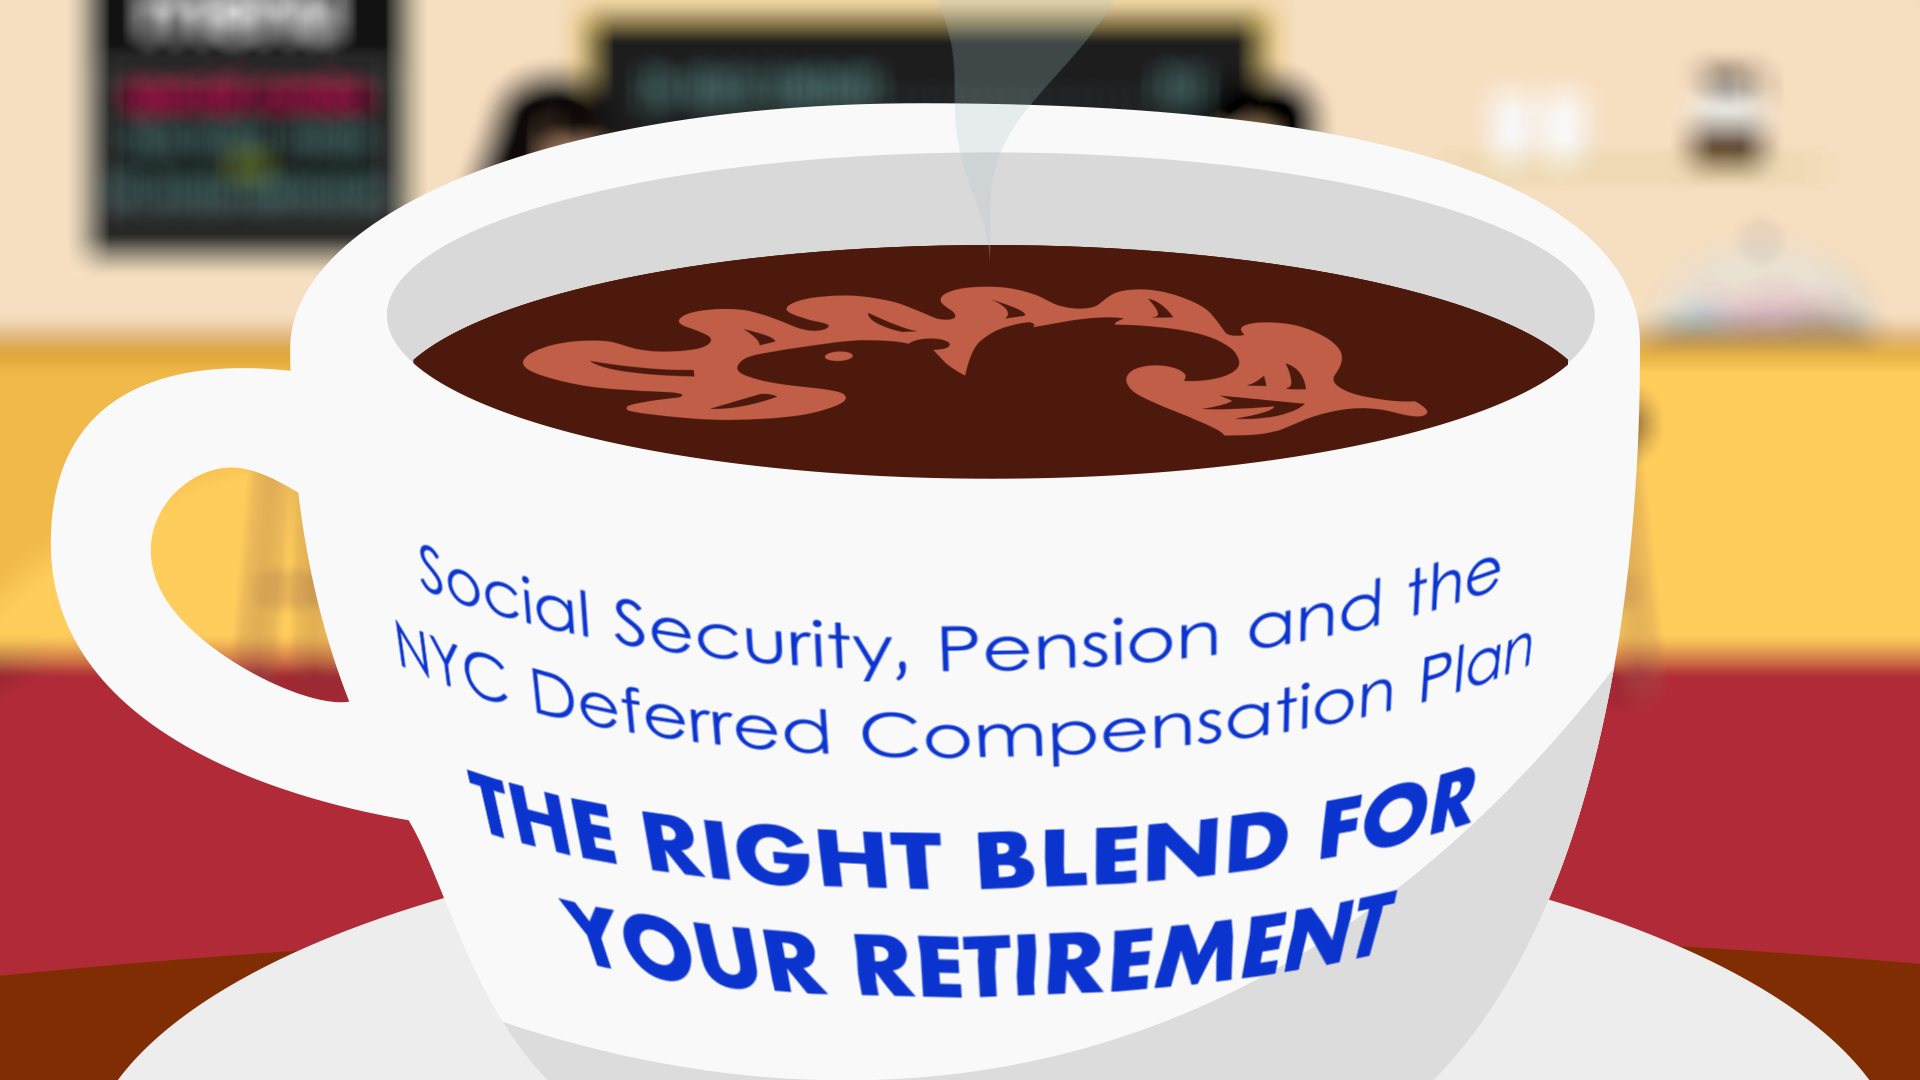 Social Security, Pension and NYC DCP. The Right Blend for Your Retirement video page